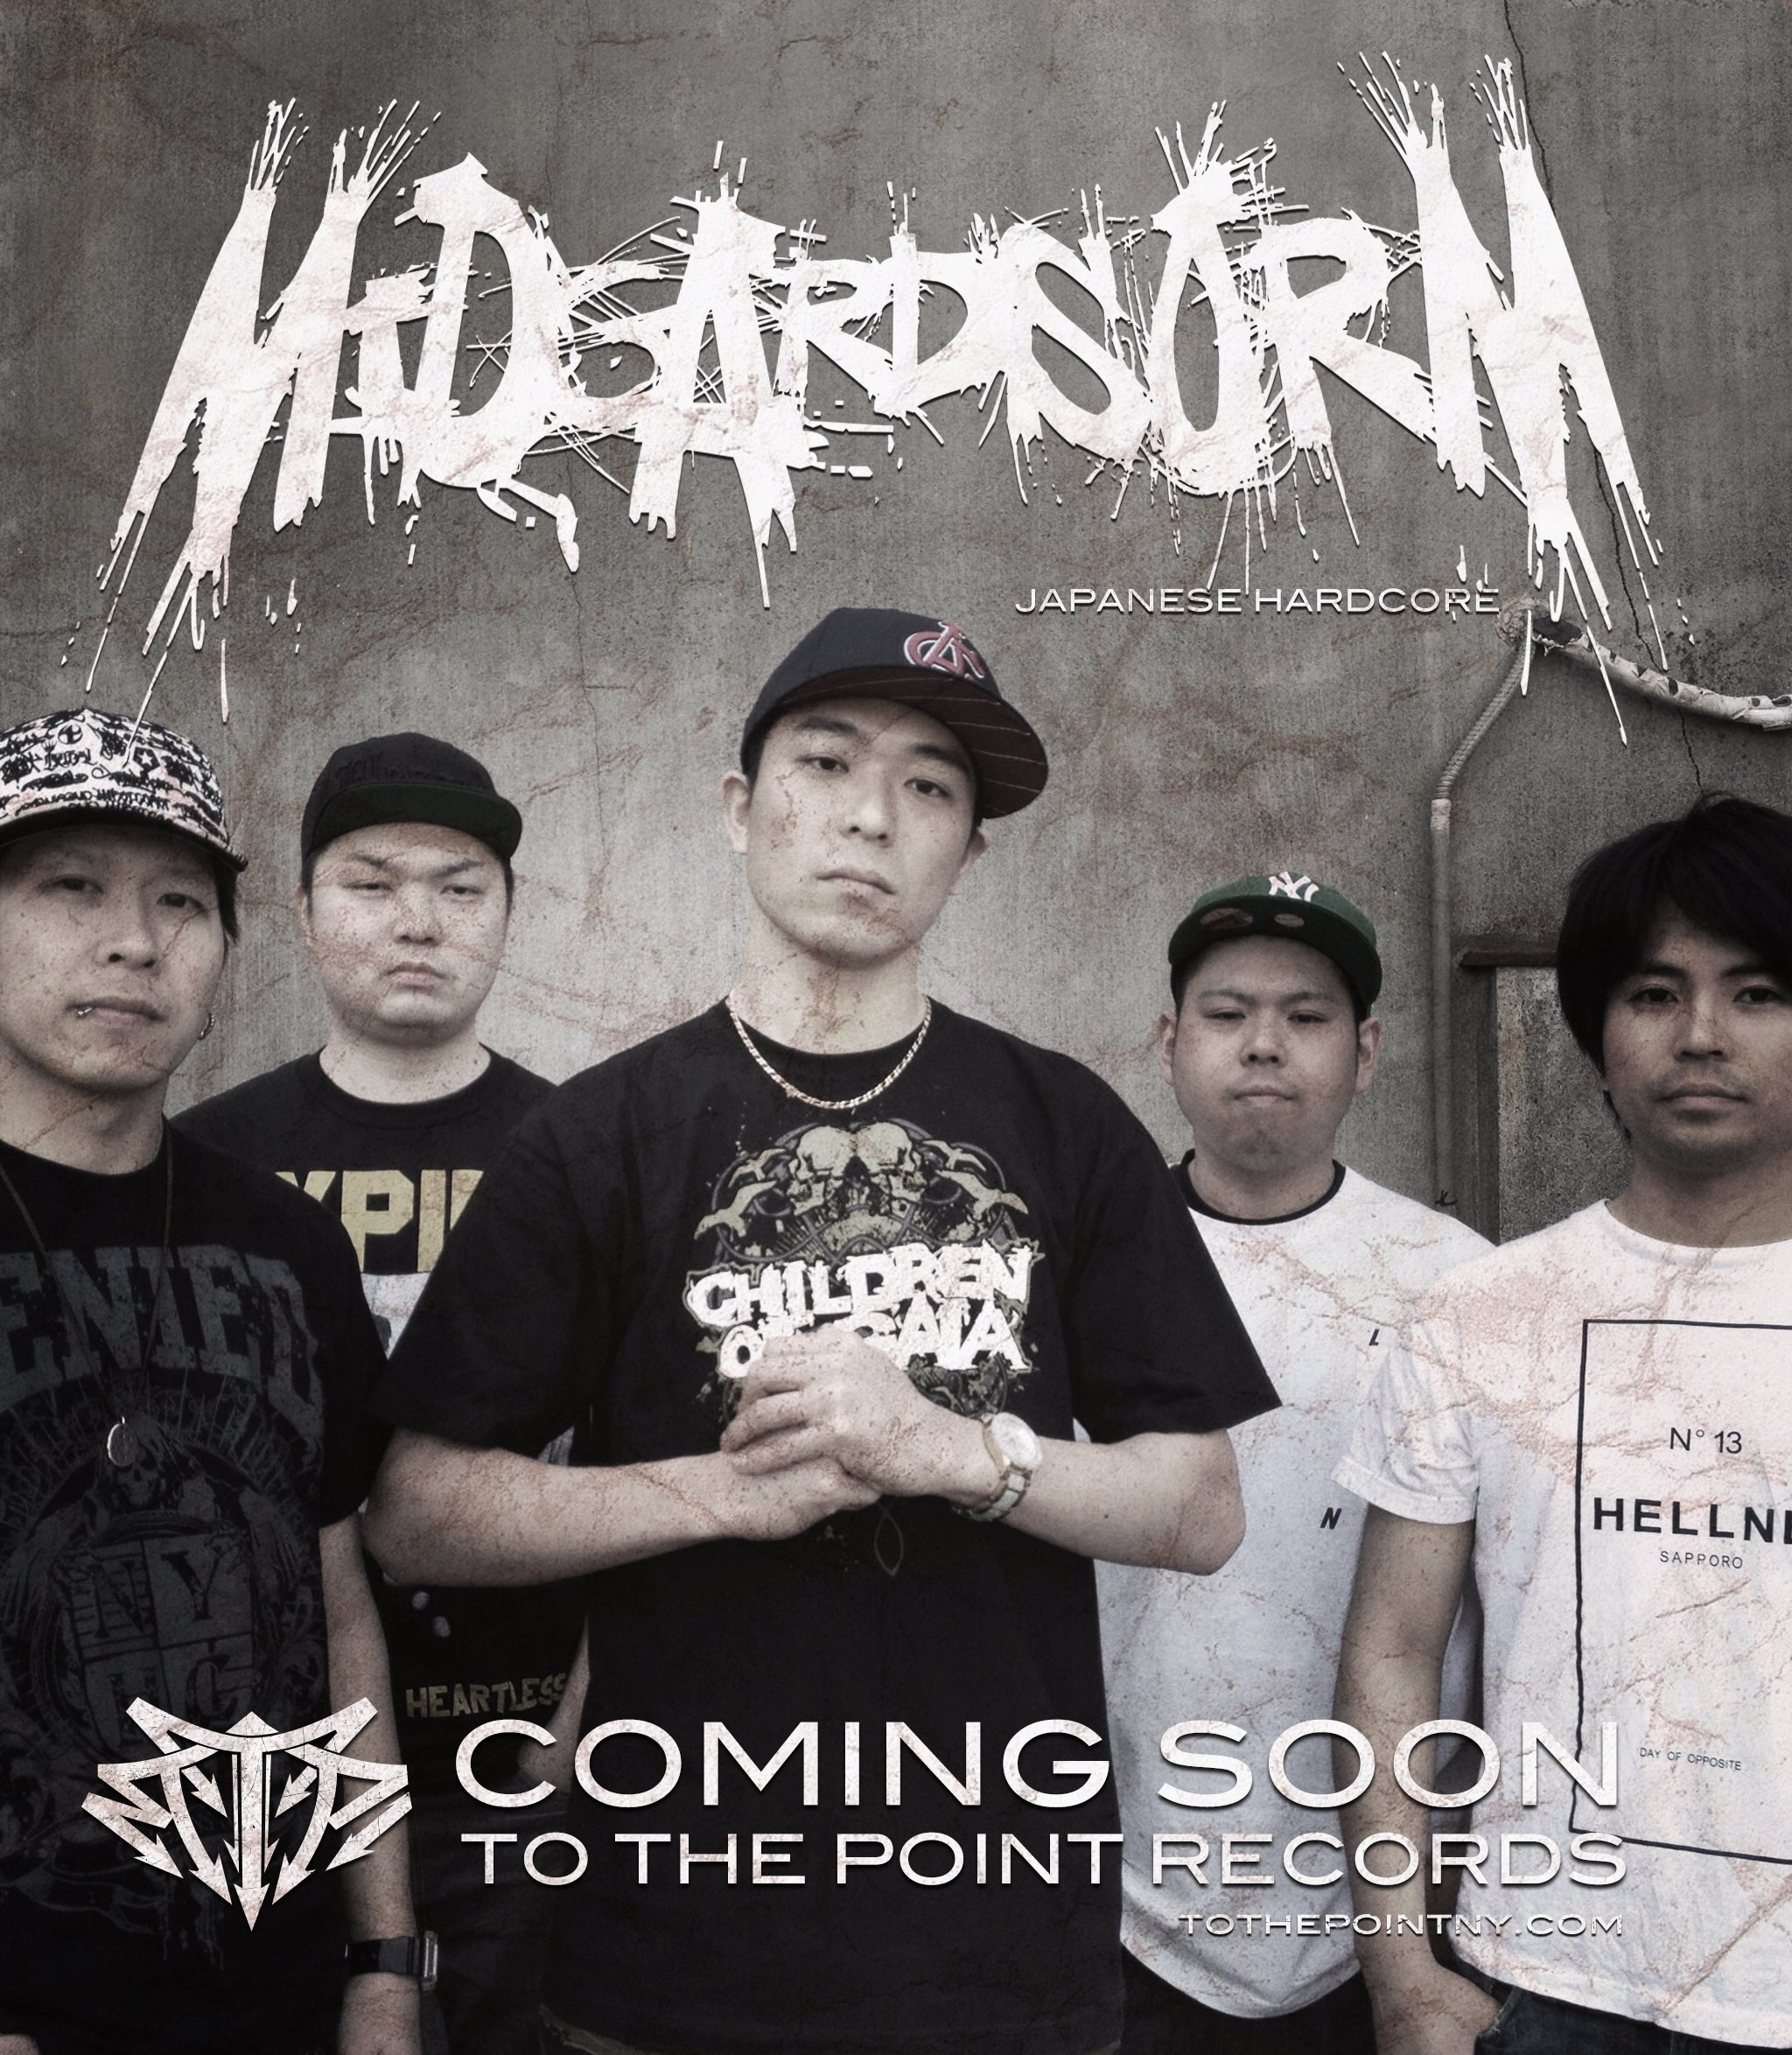 Midgardsorm debut ep coming soon on To the Point Records